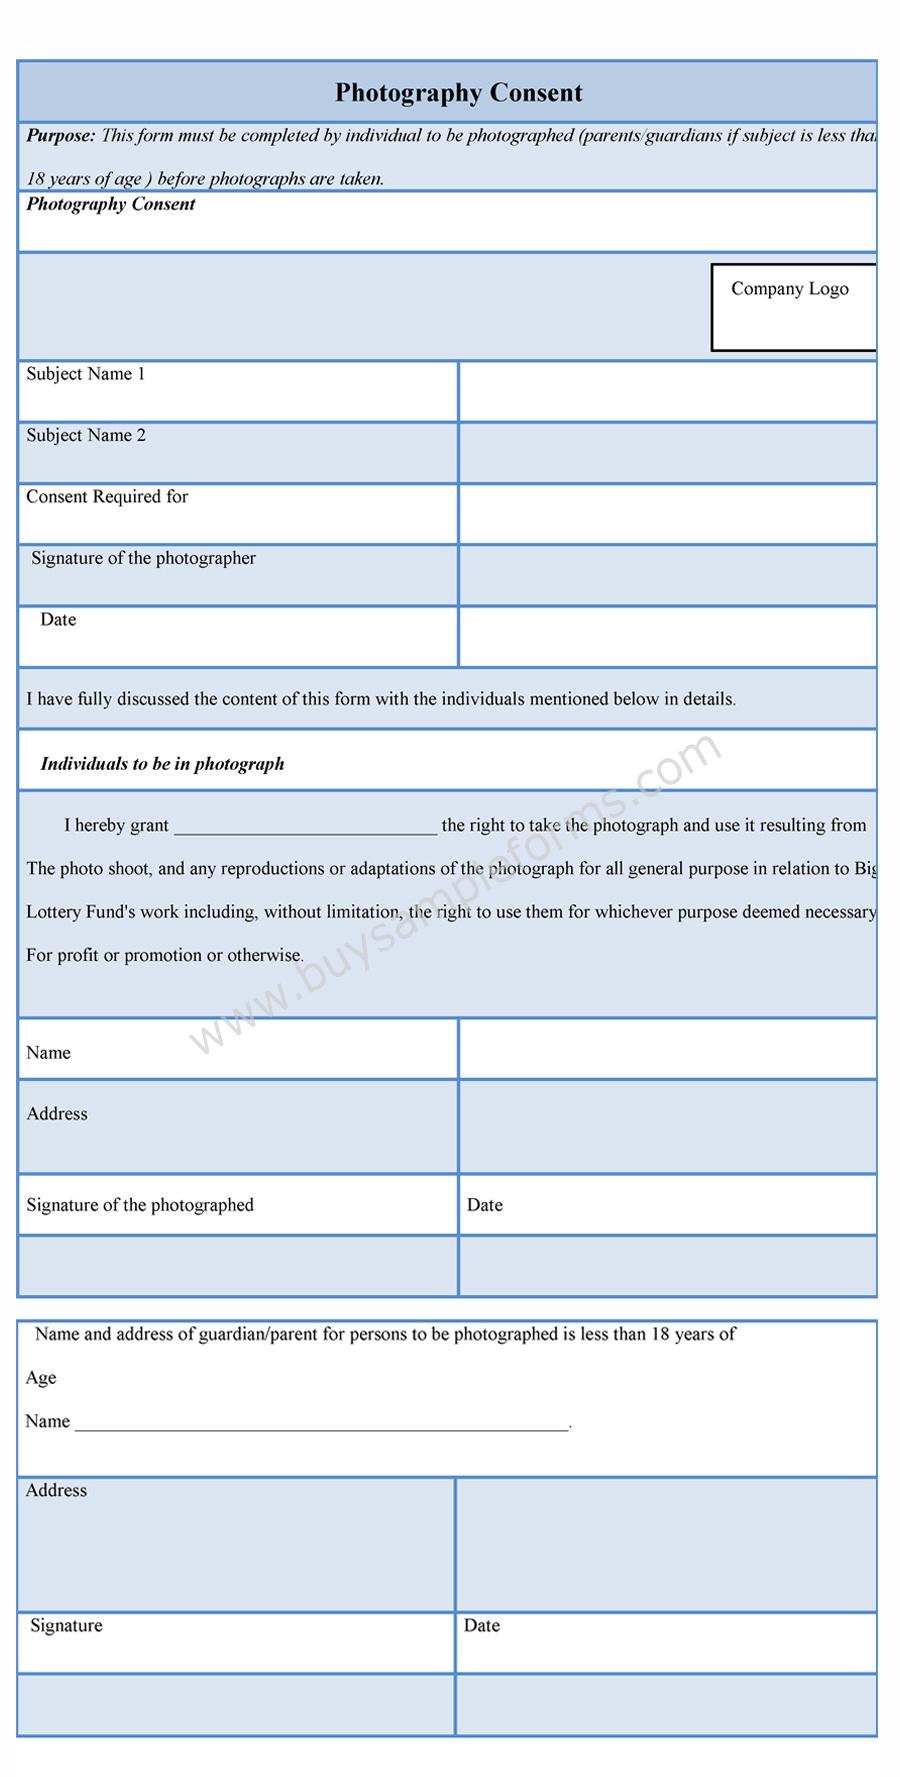 Photography Consent Form template